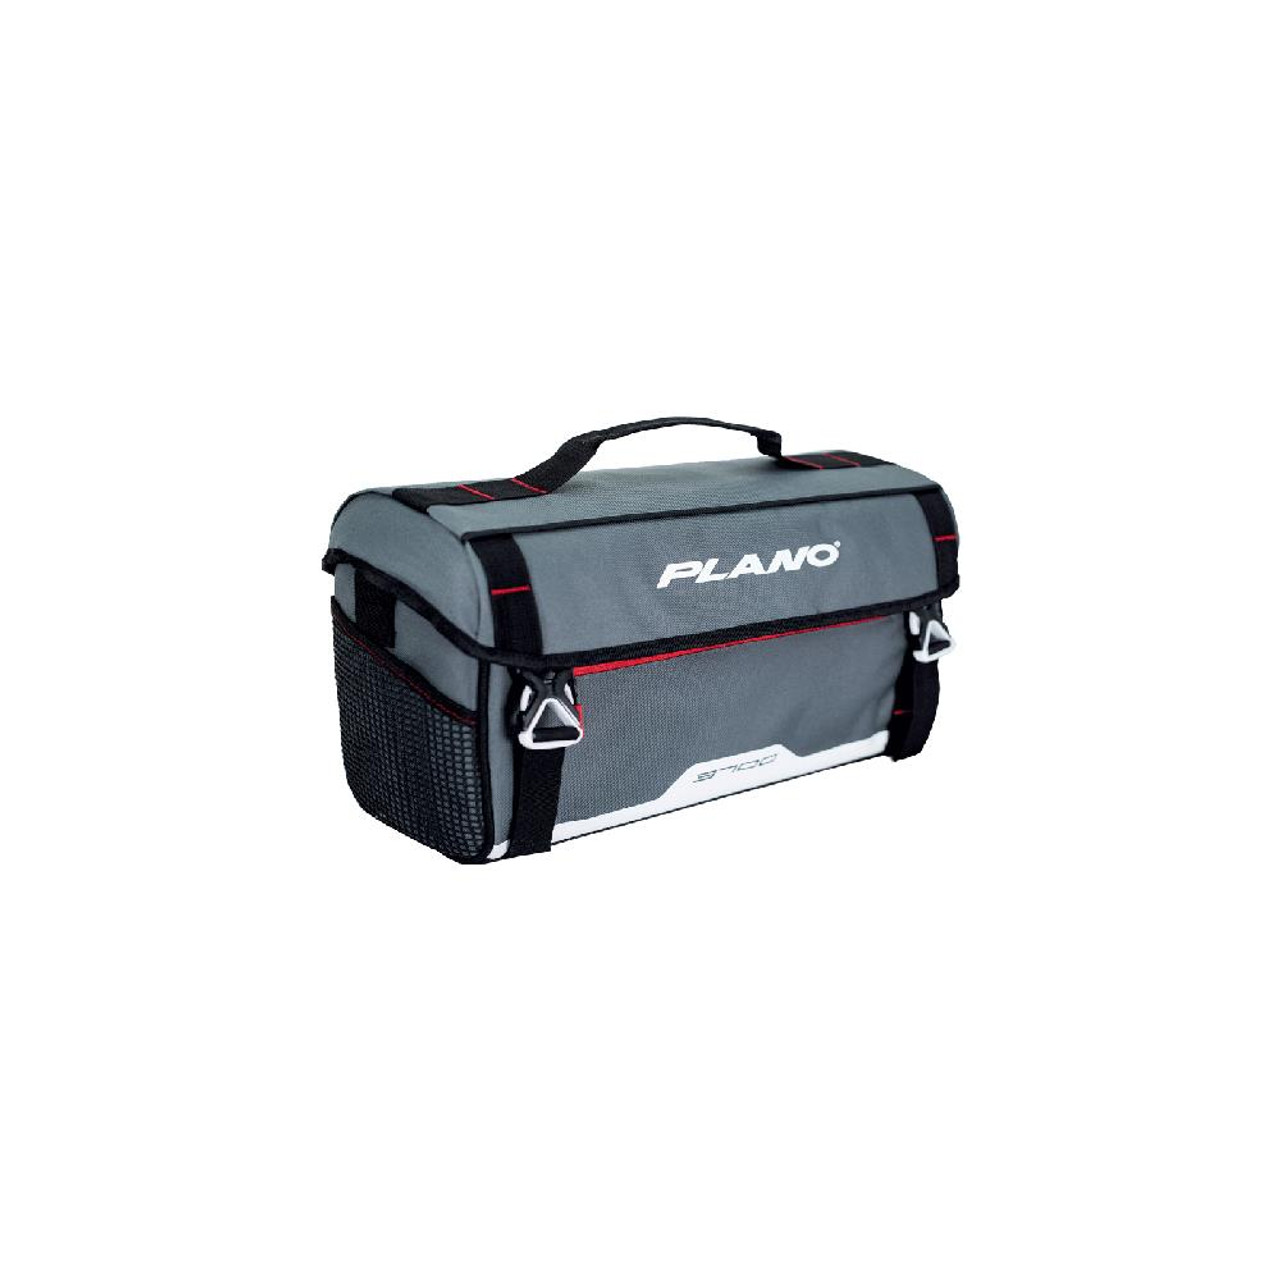 Plano 3600 SoftSider Tackle Bag Overview 